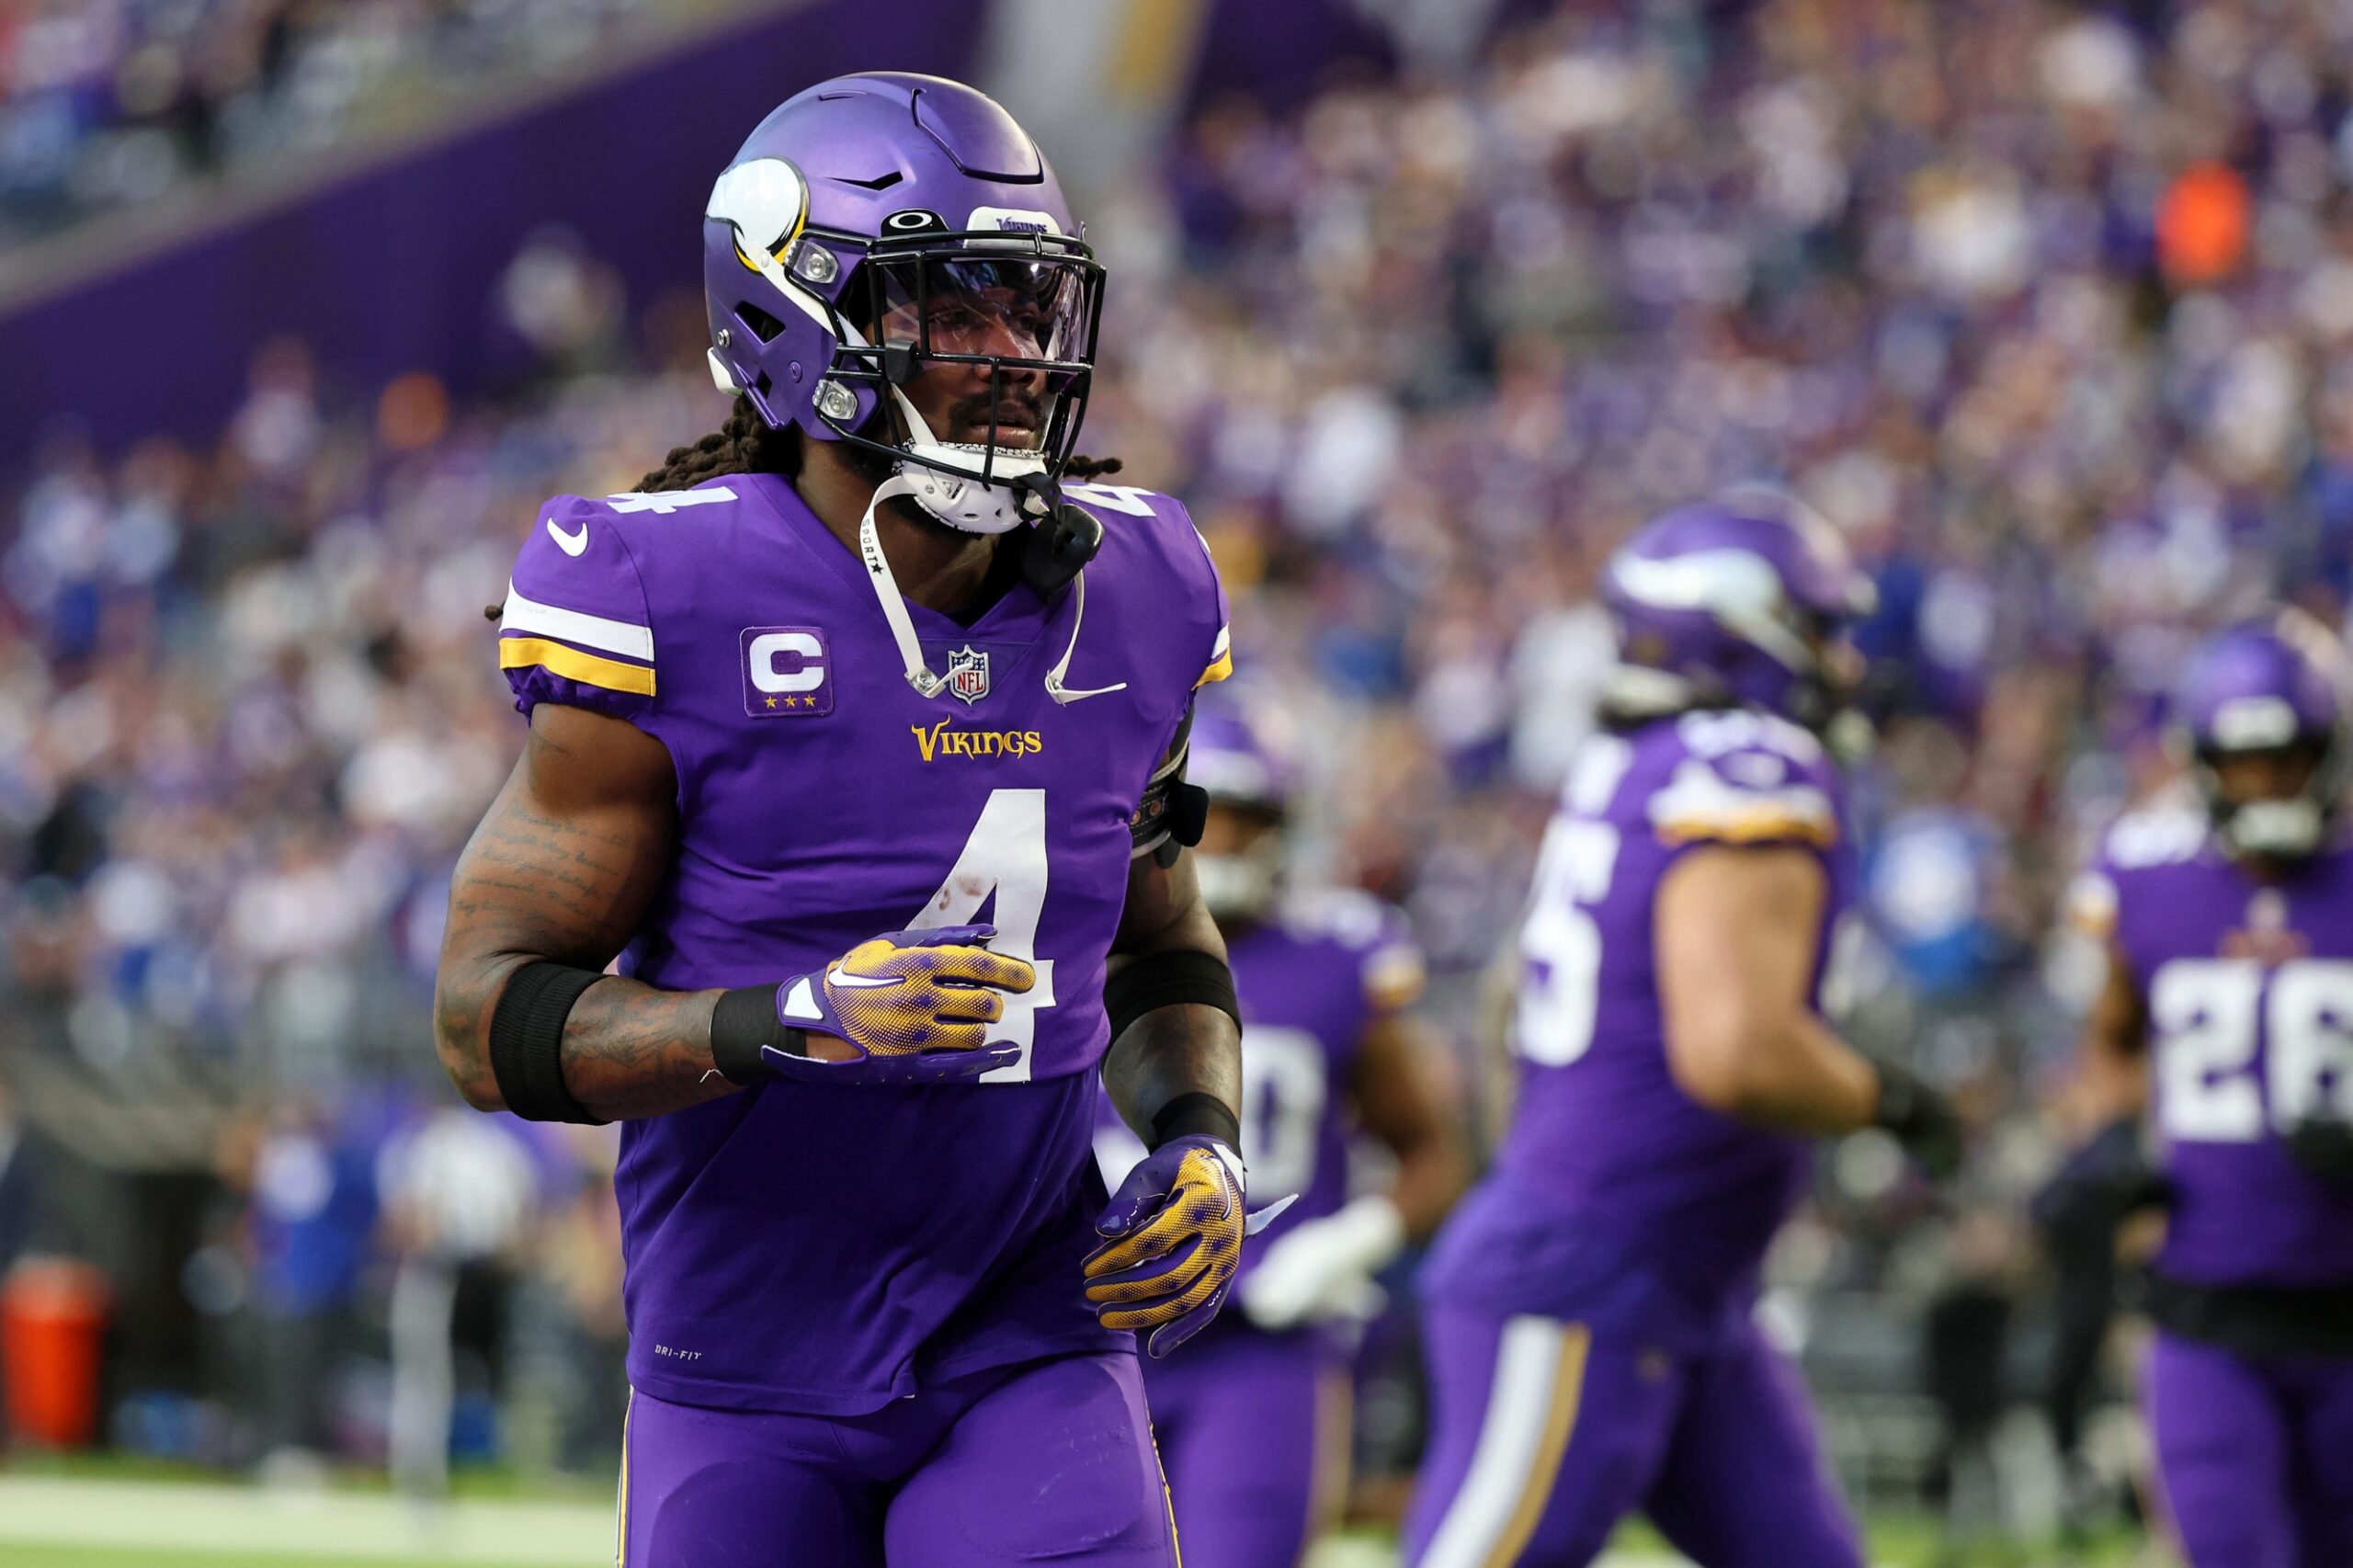 Saints vs. Vikings player props, 2020 Christmas Day NFL betting trends:  Dalvin Cook under 83.5 yards 